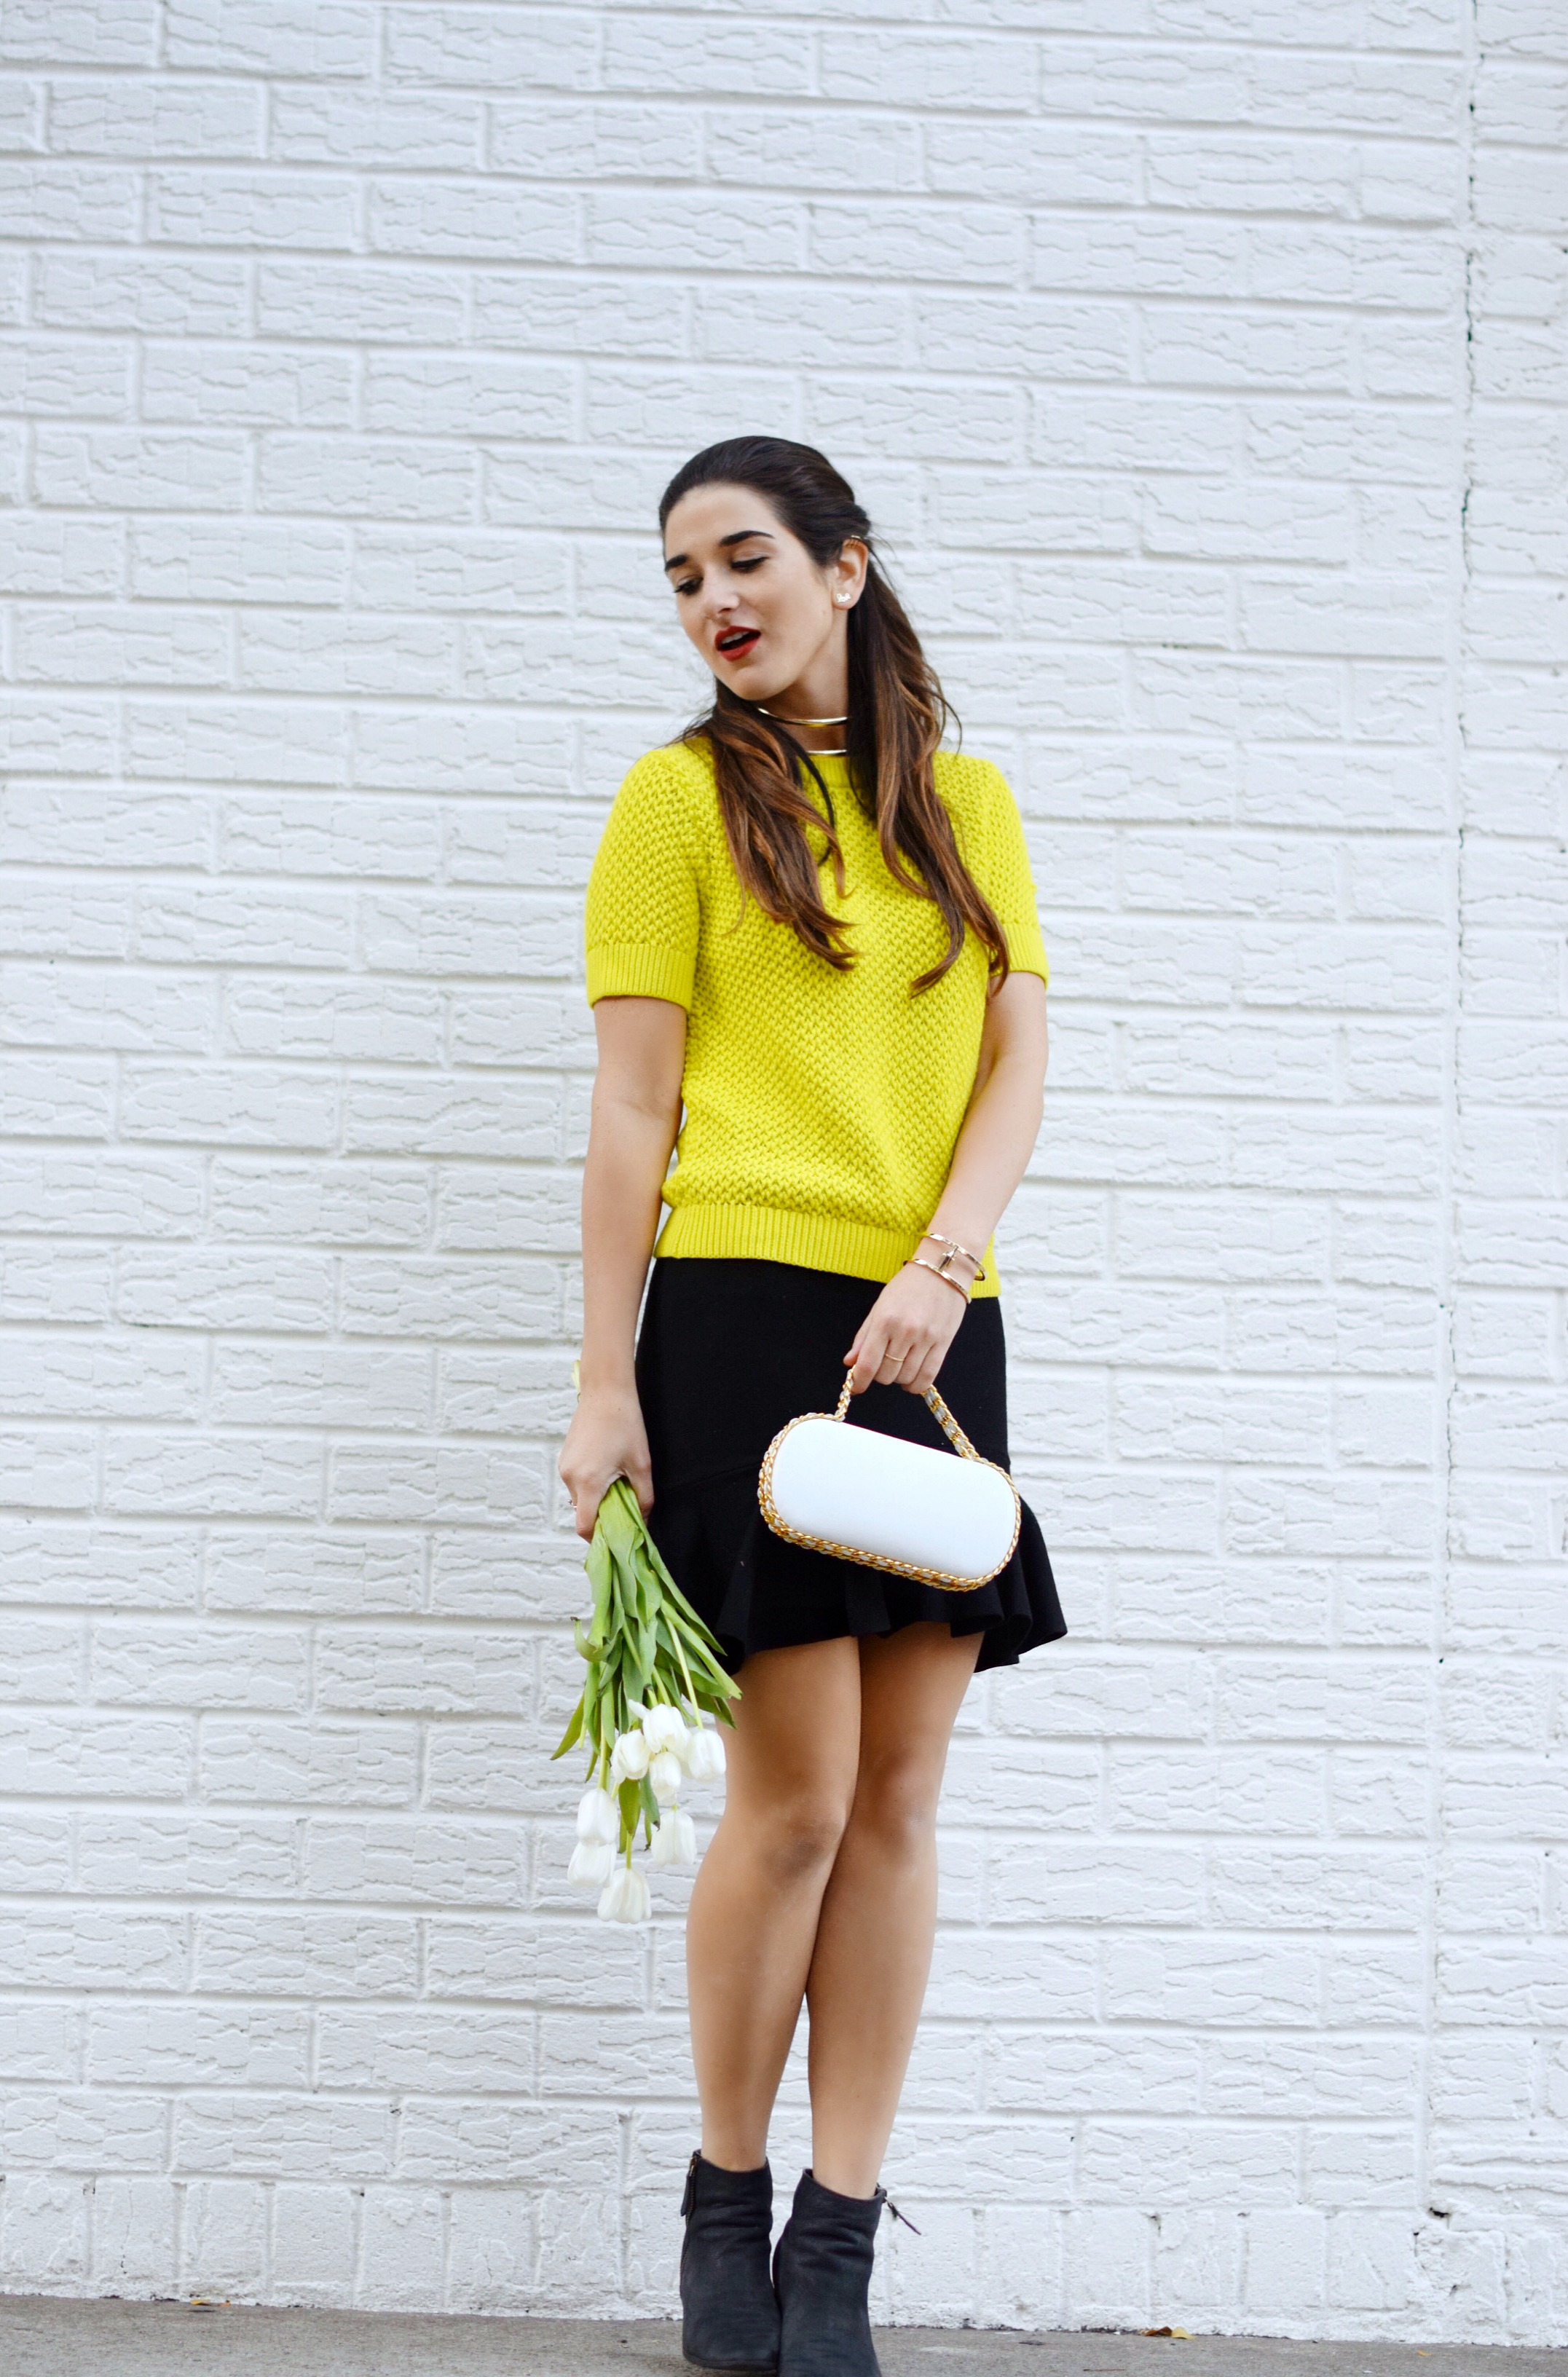 White Prince Minaudiere Erin Dana Louboutins & Love Fashion Blog Esther Santer NYC Street Style Blogger Bag Giveaway Gold Jewelry Lydell Bracelet Collar Necklace Black Booties Flared Ruffle Skirt Photoshoot Model Club Monaco Neon Yellow Sweater Outfit.jpg